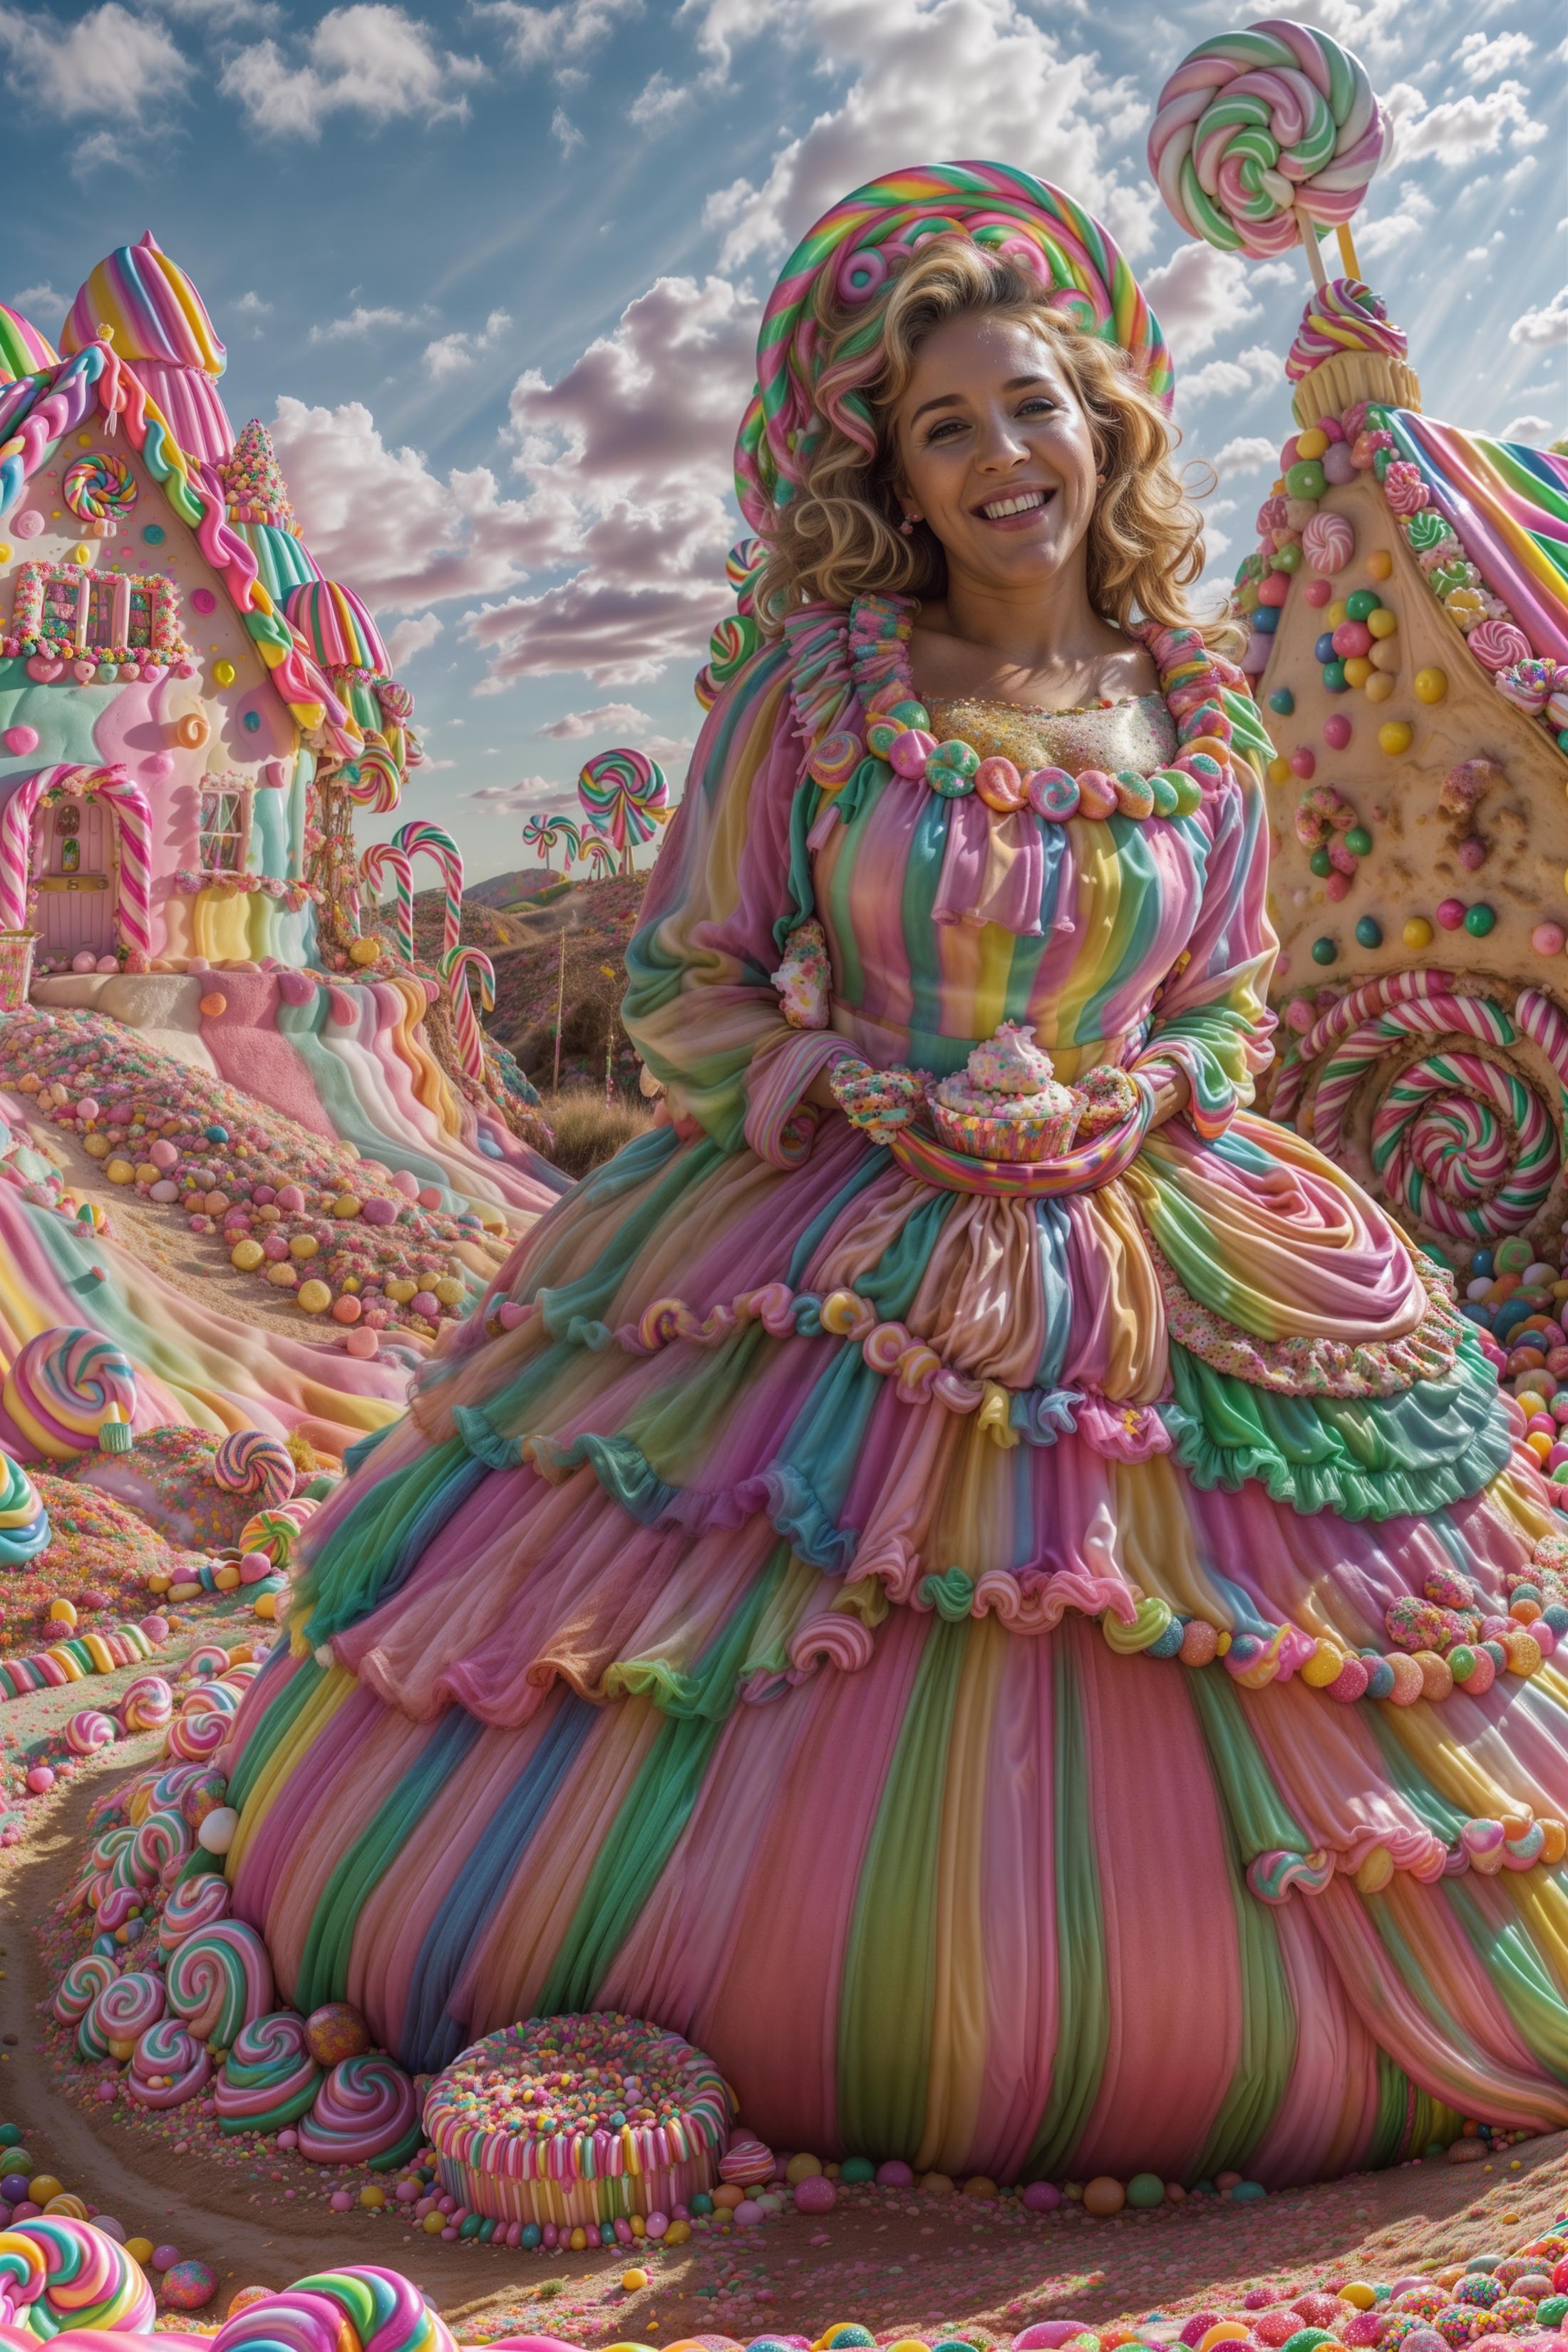 CANDYLAND image by I_dont_want_karma_